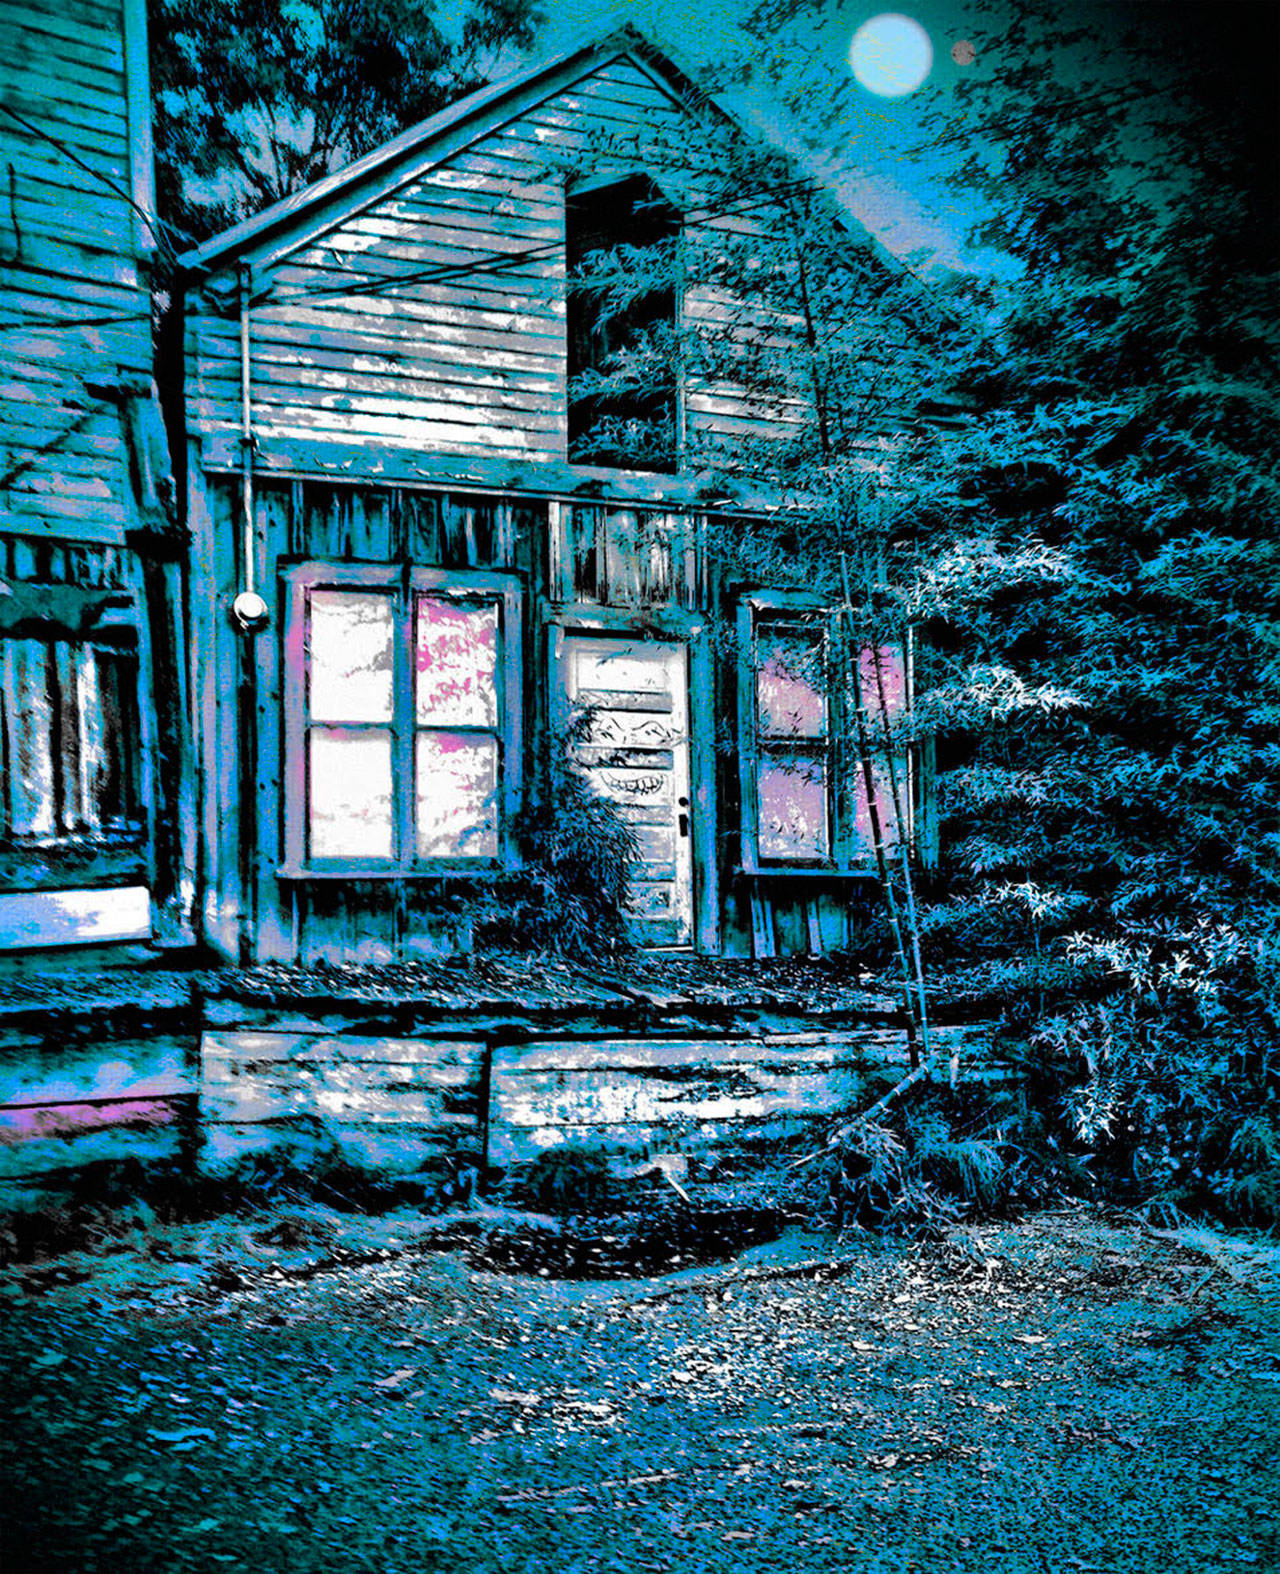 Anne Gordon’s show at Puget Sound Community Credit Union includes this haunting shot of the Portage Store (Anne Gordon Photo).